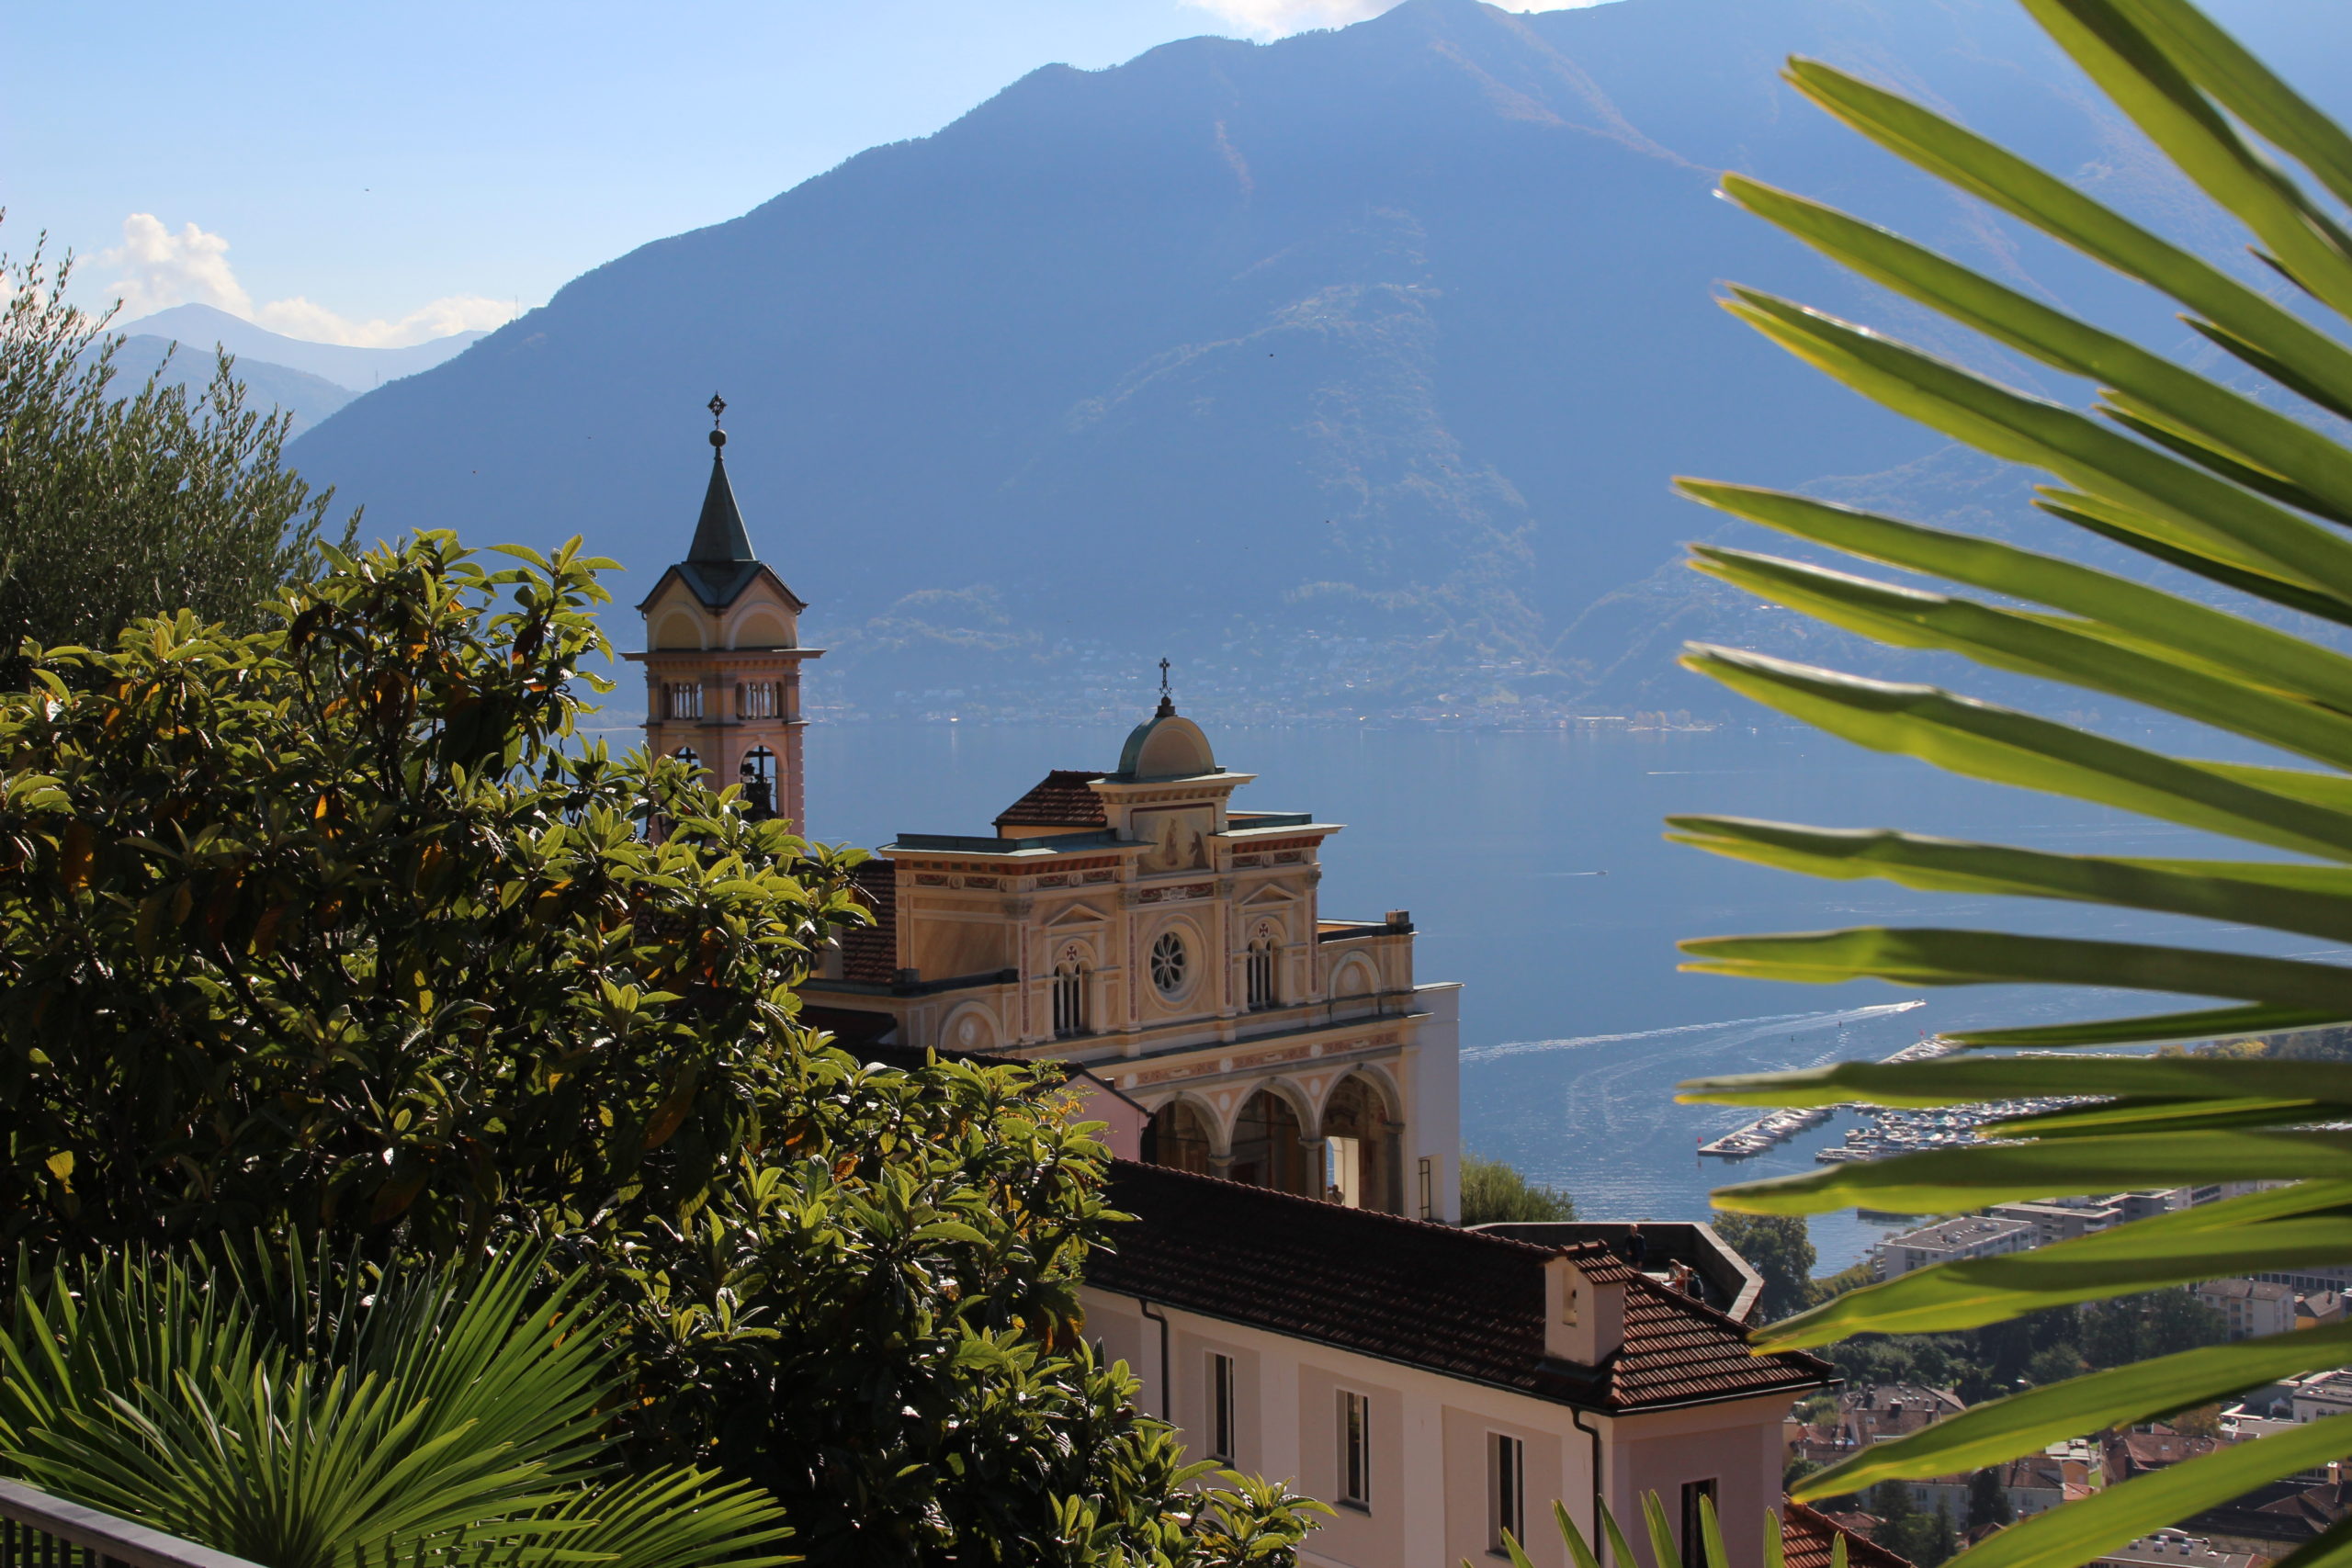 Madonna del Sasso and a palm tree